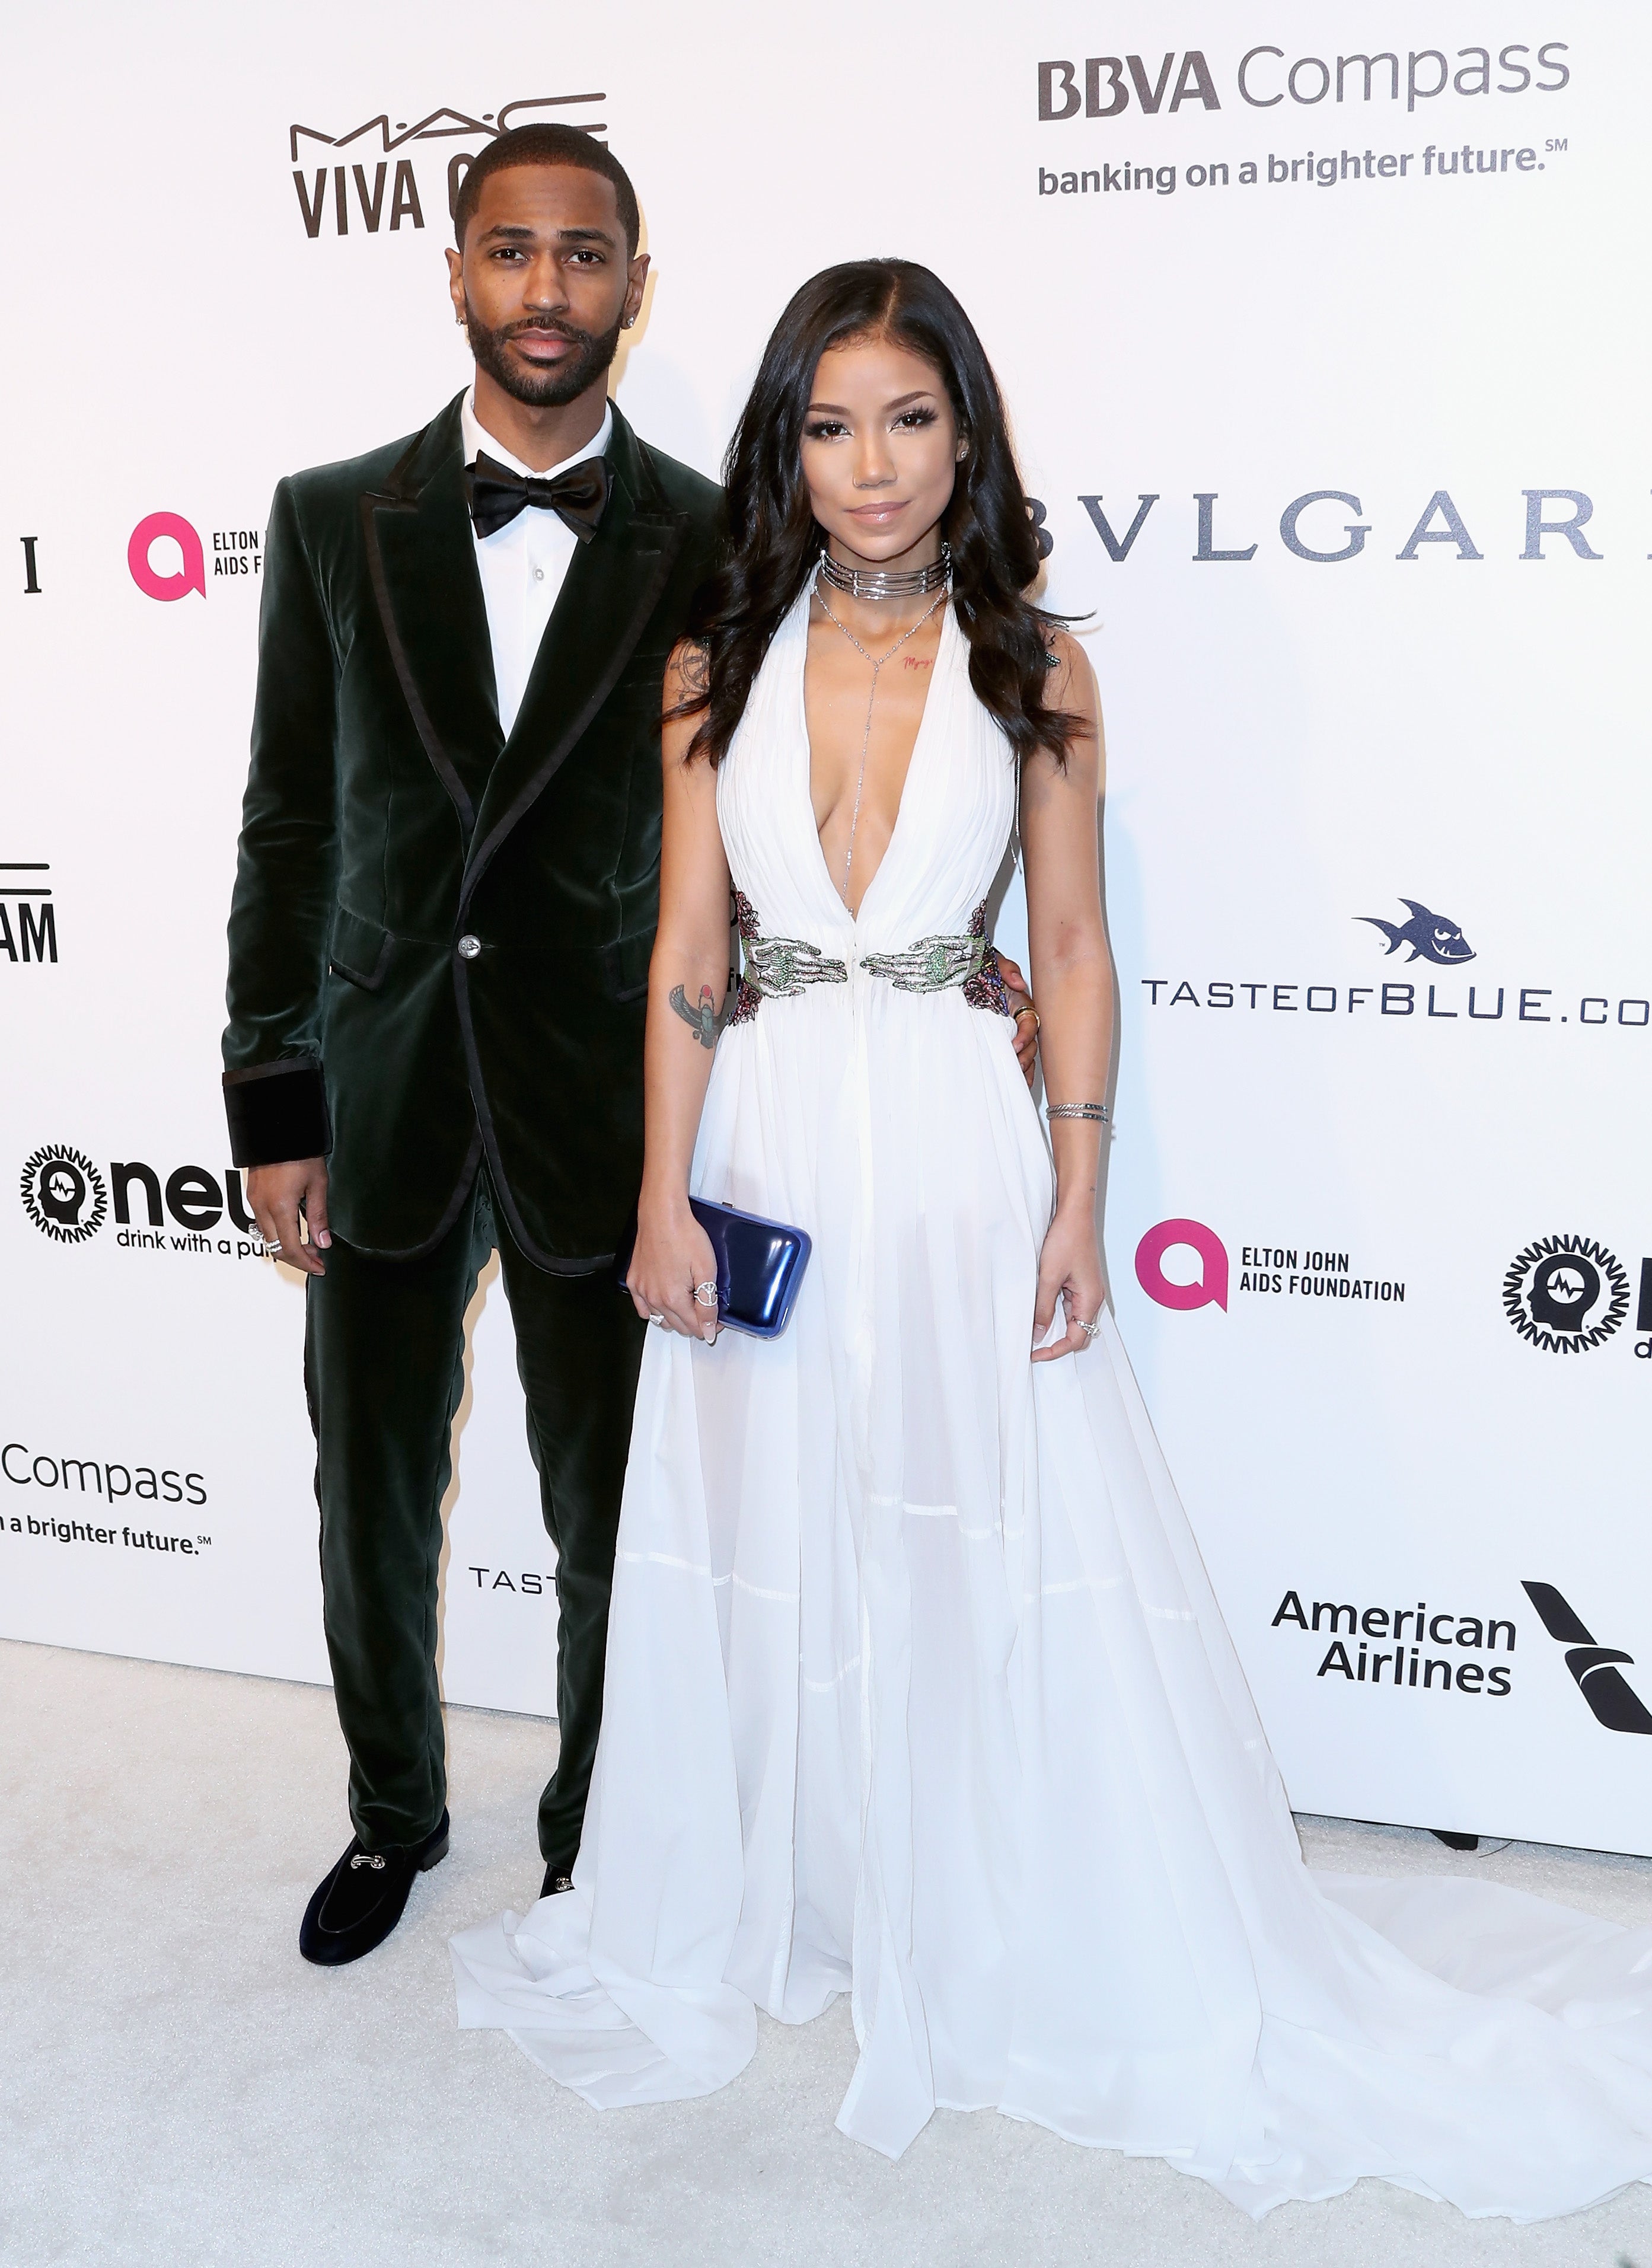 Happy Birthday! 15 Photos That Prove Jhene Aiko is a Style Chameleon
